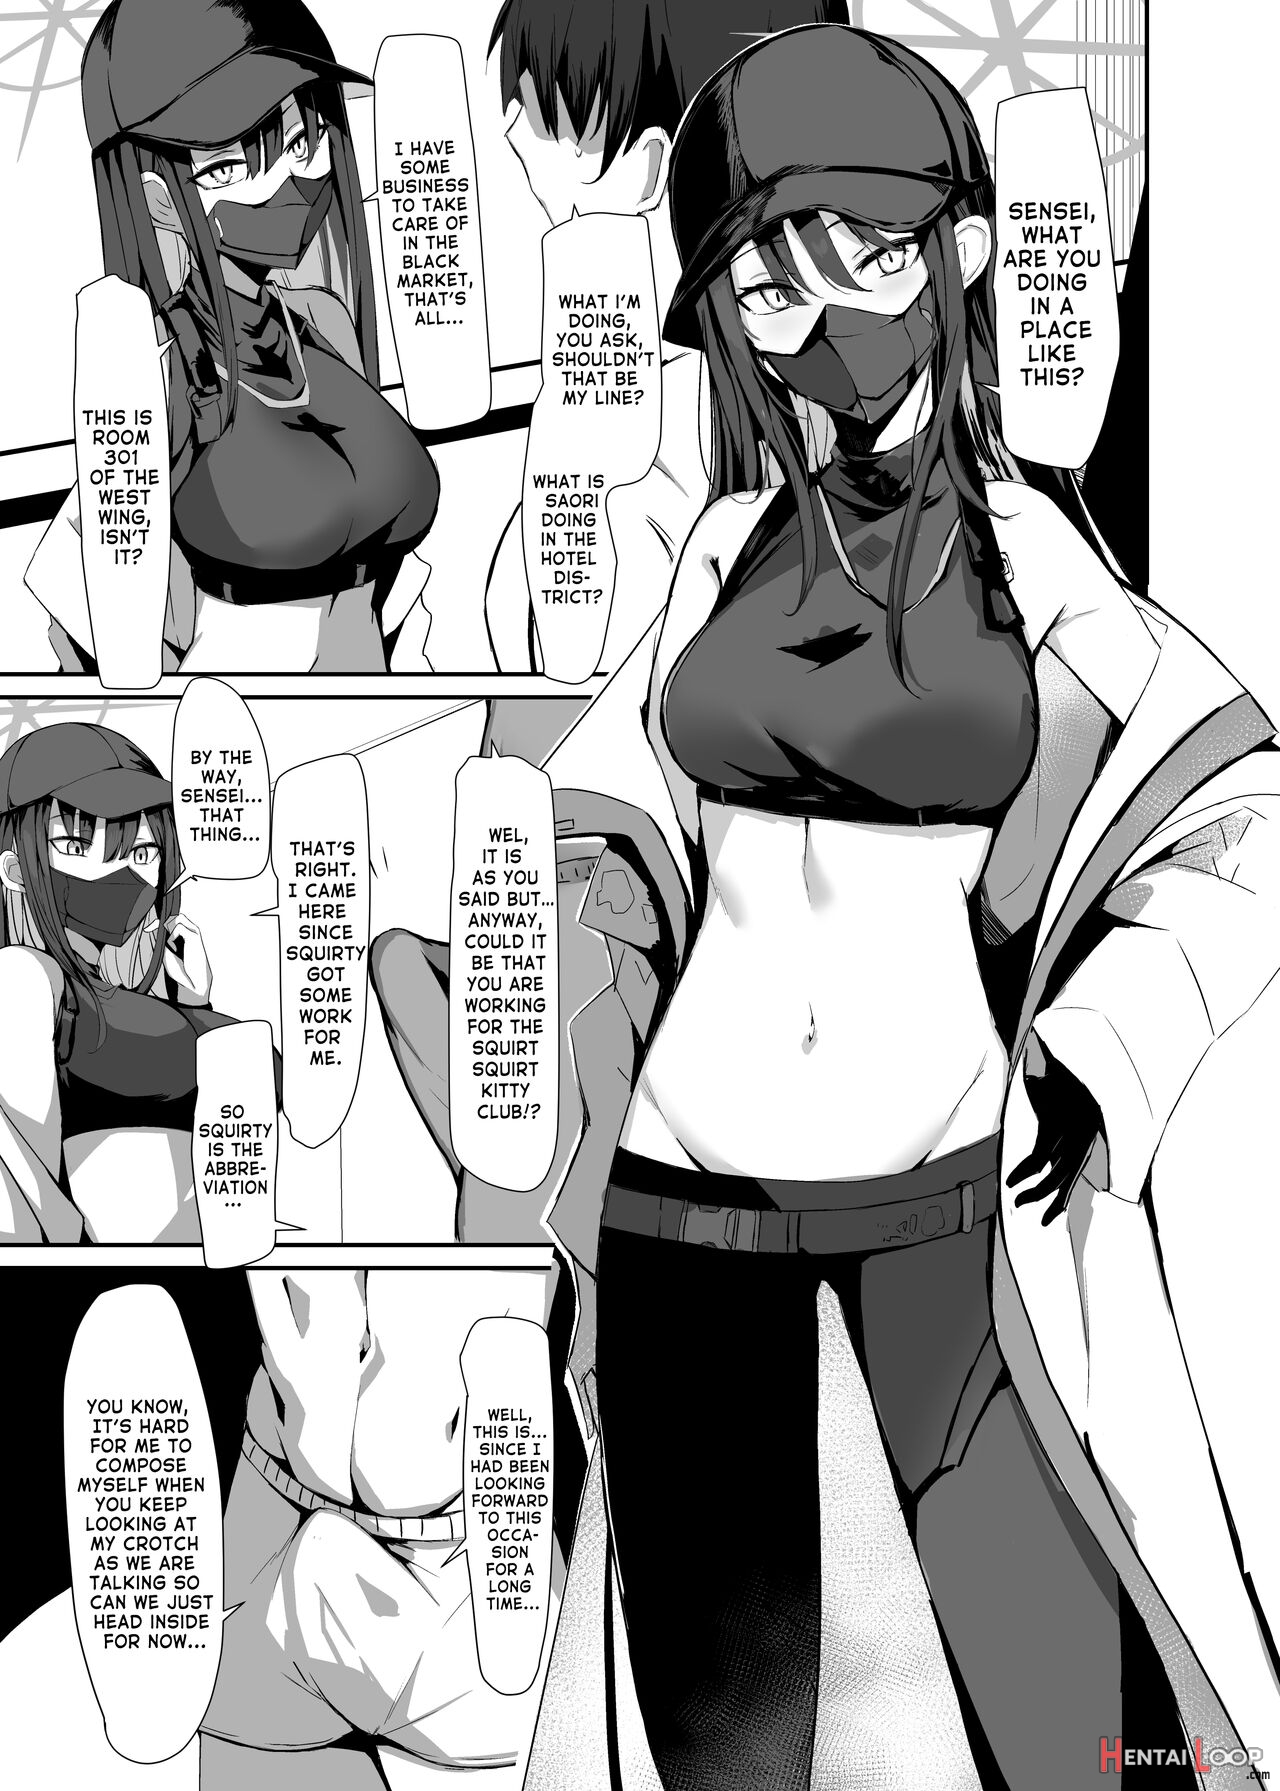 The Book Where I Hired A Sex Worker But Then Saori Showed Up And Just Like That We Had Sex page 7